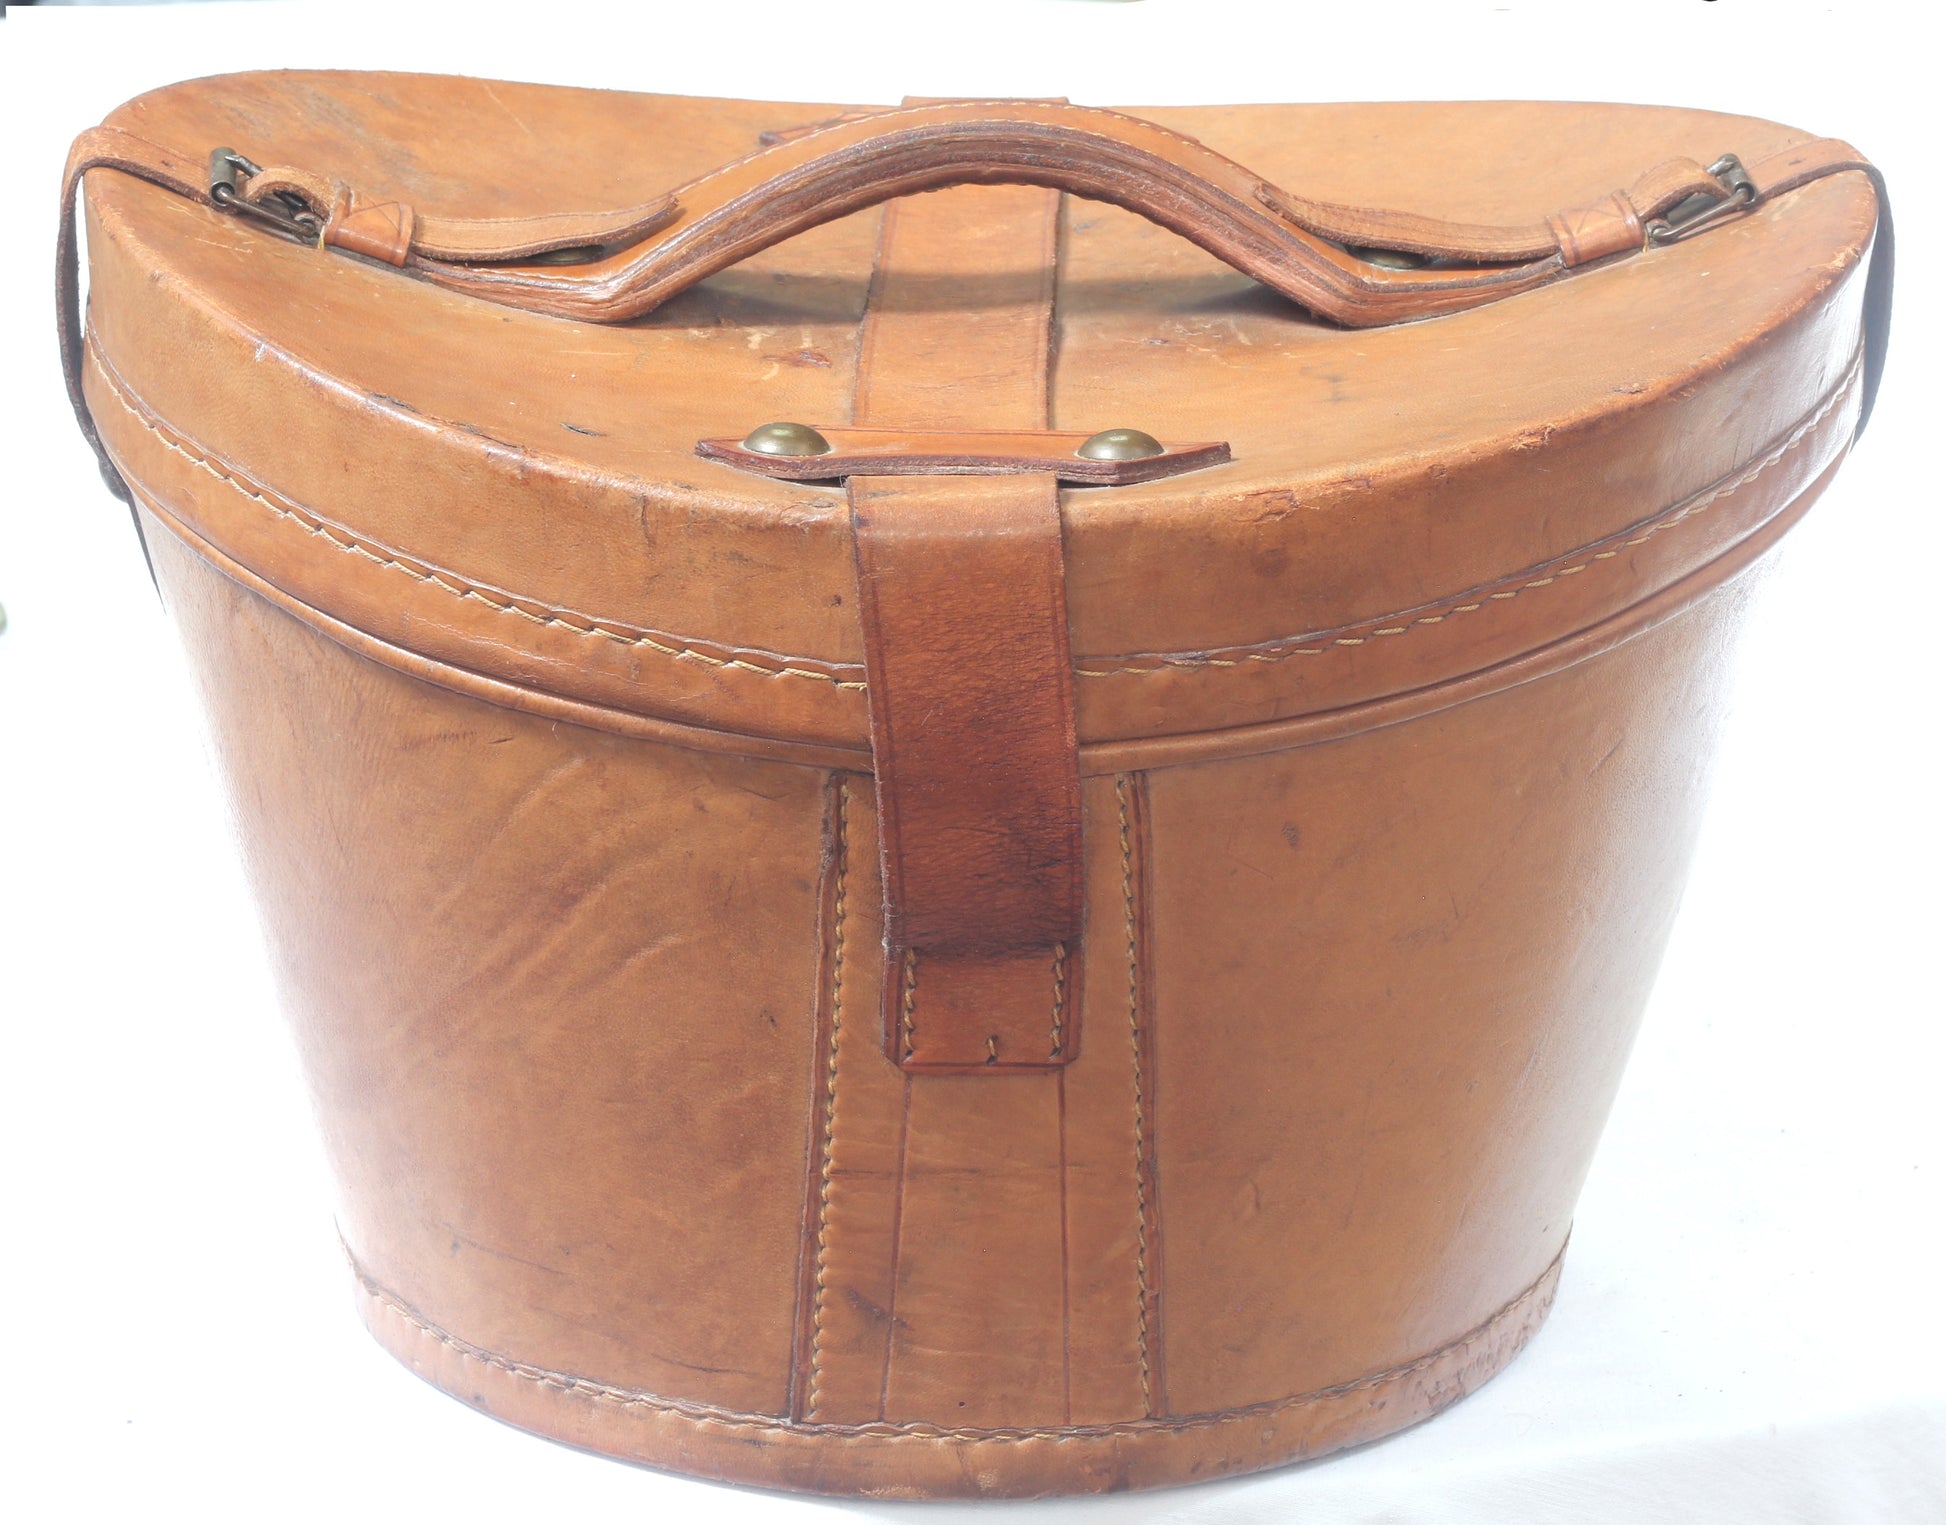 Silk Top Hat Size 7⅛-7¼ in Leather Hat Box